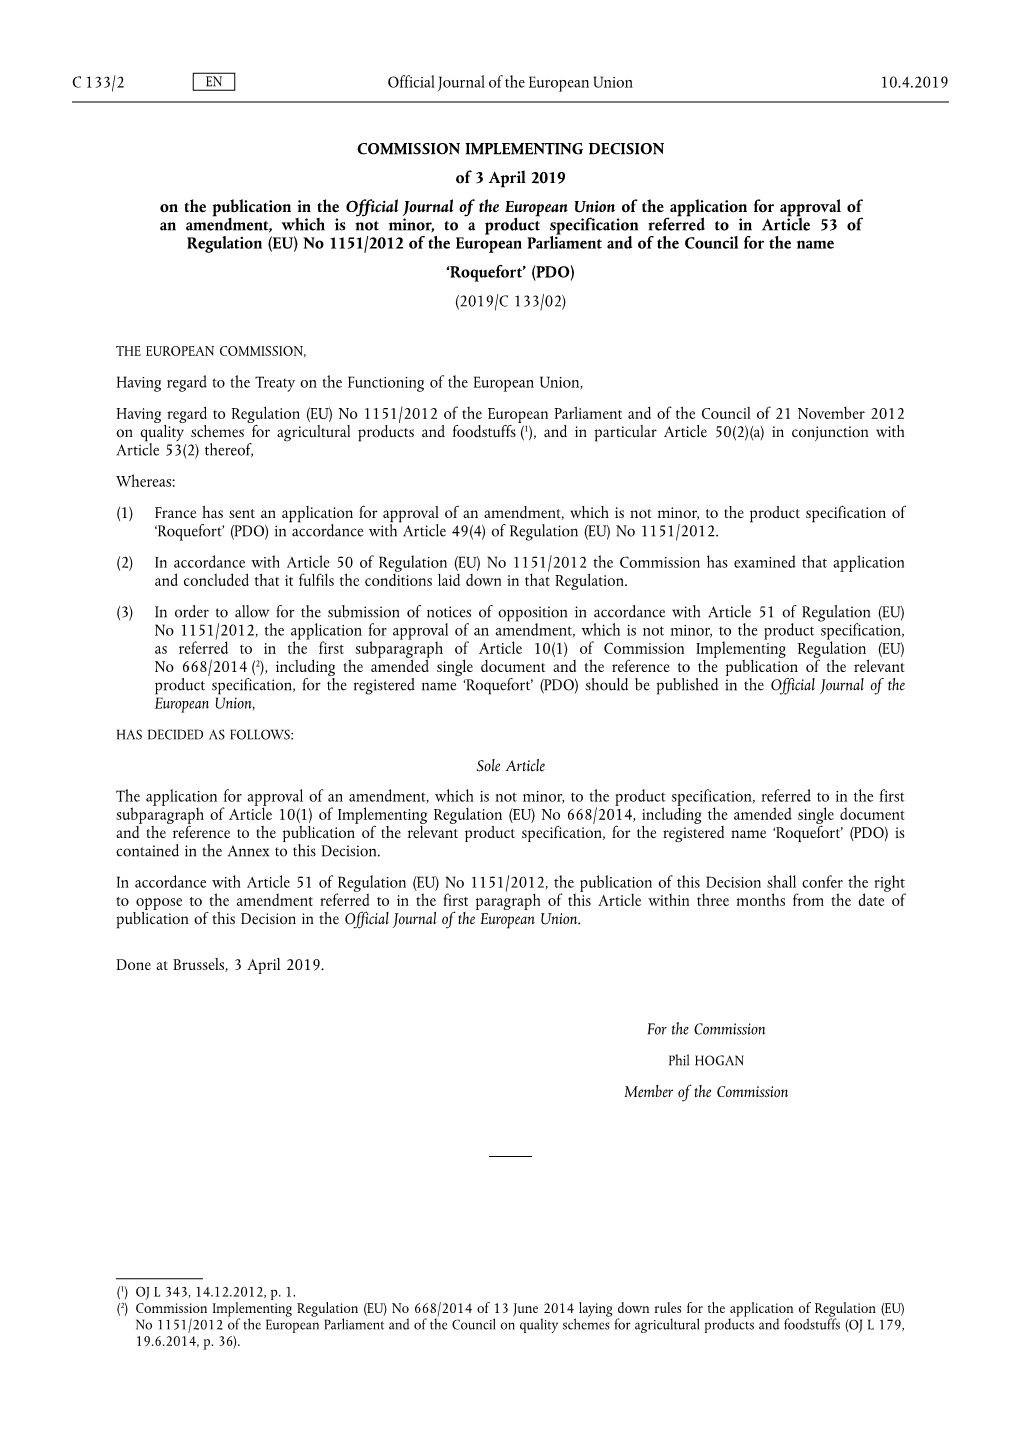 Commission Implementing Decision of 3 April 2019 on the Publication In